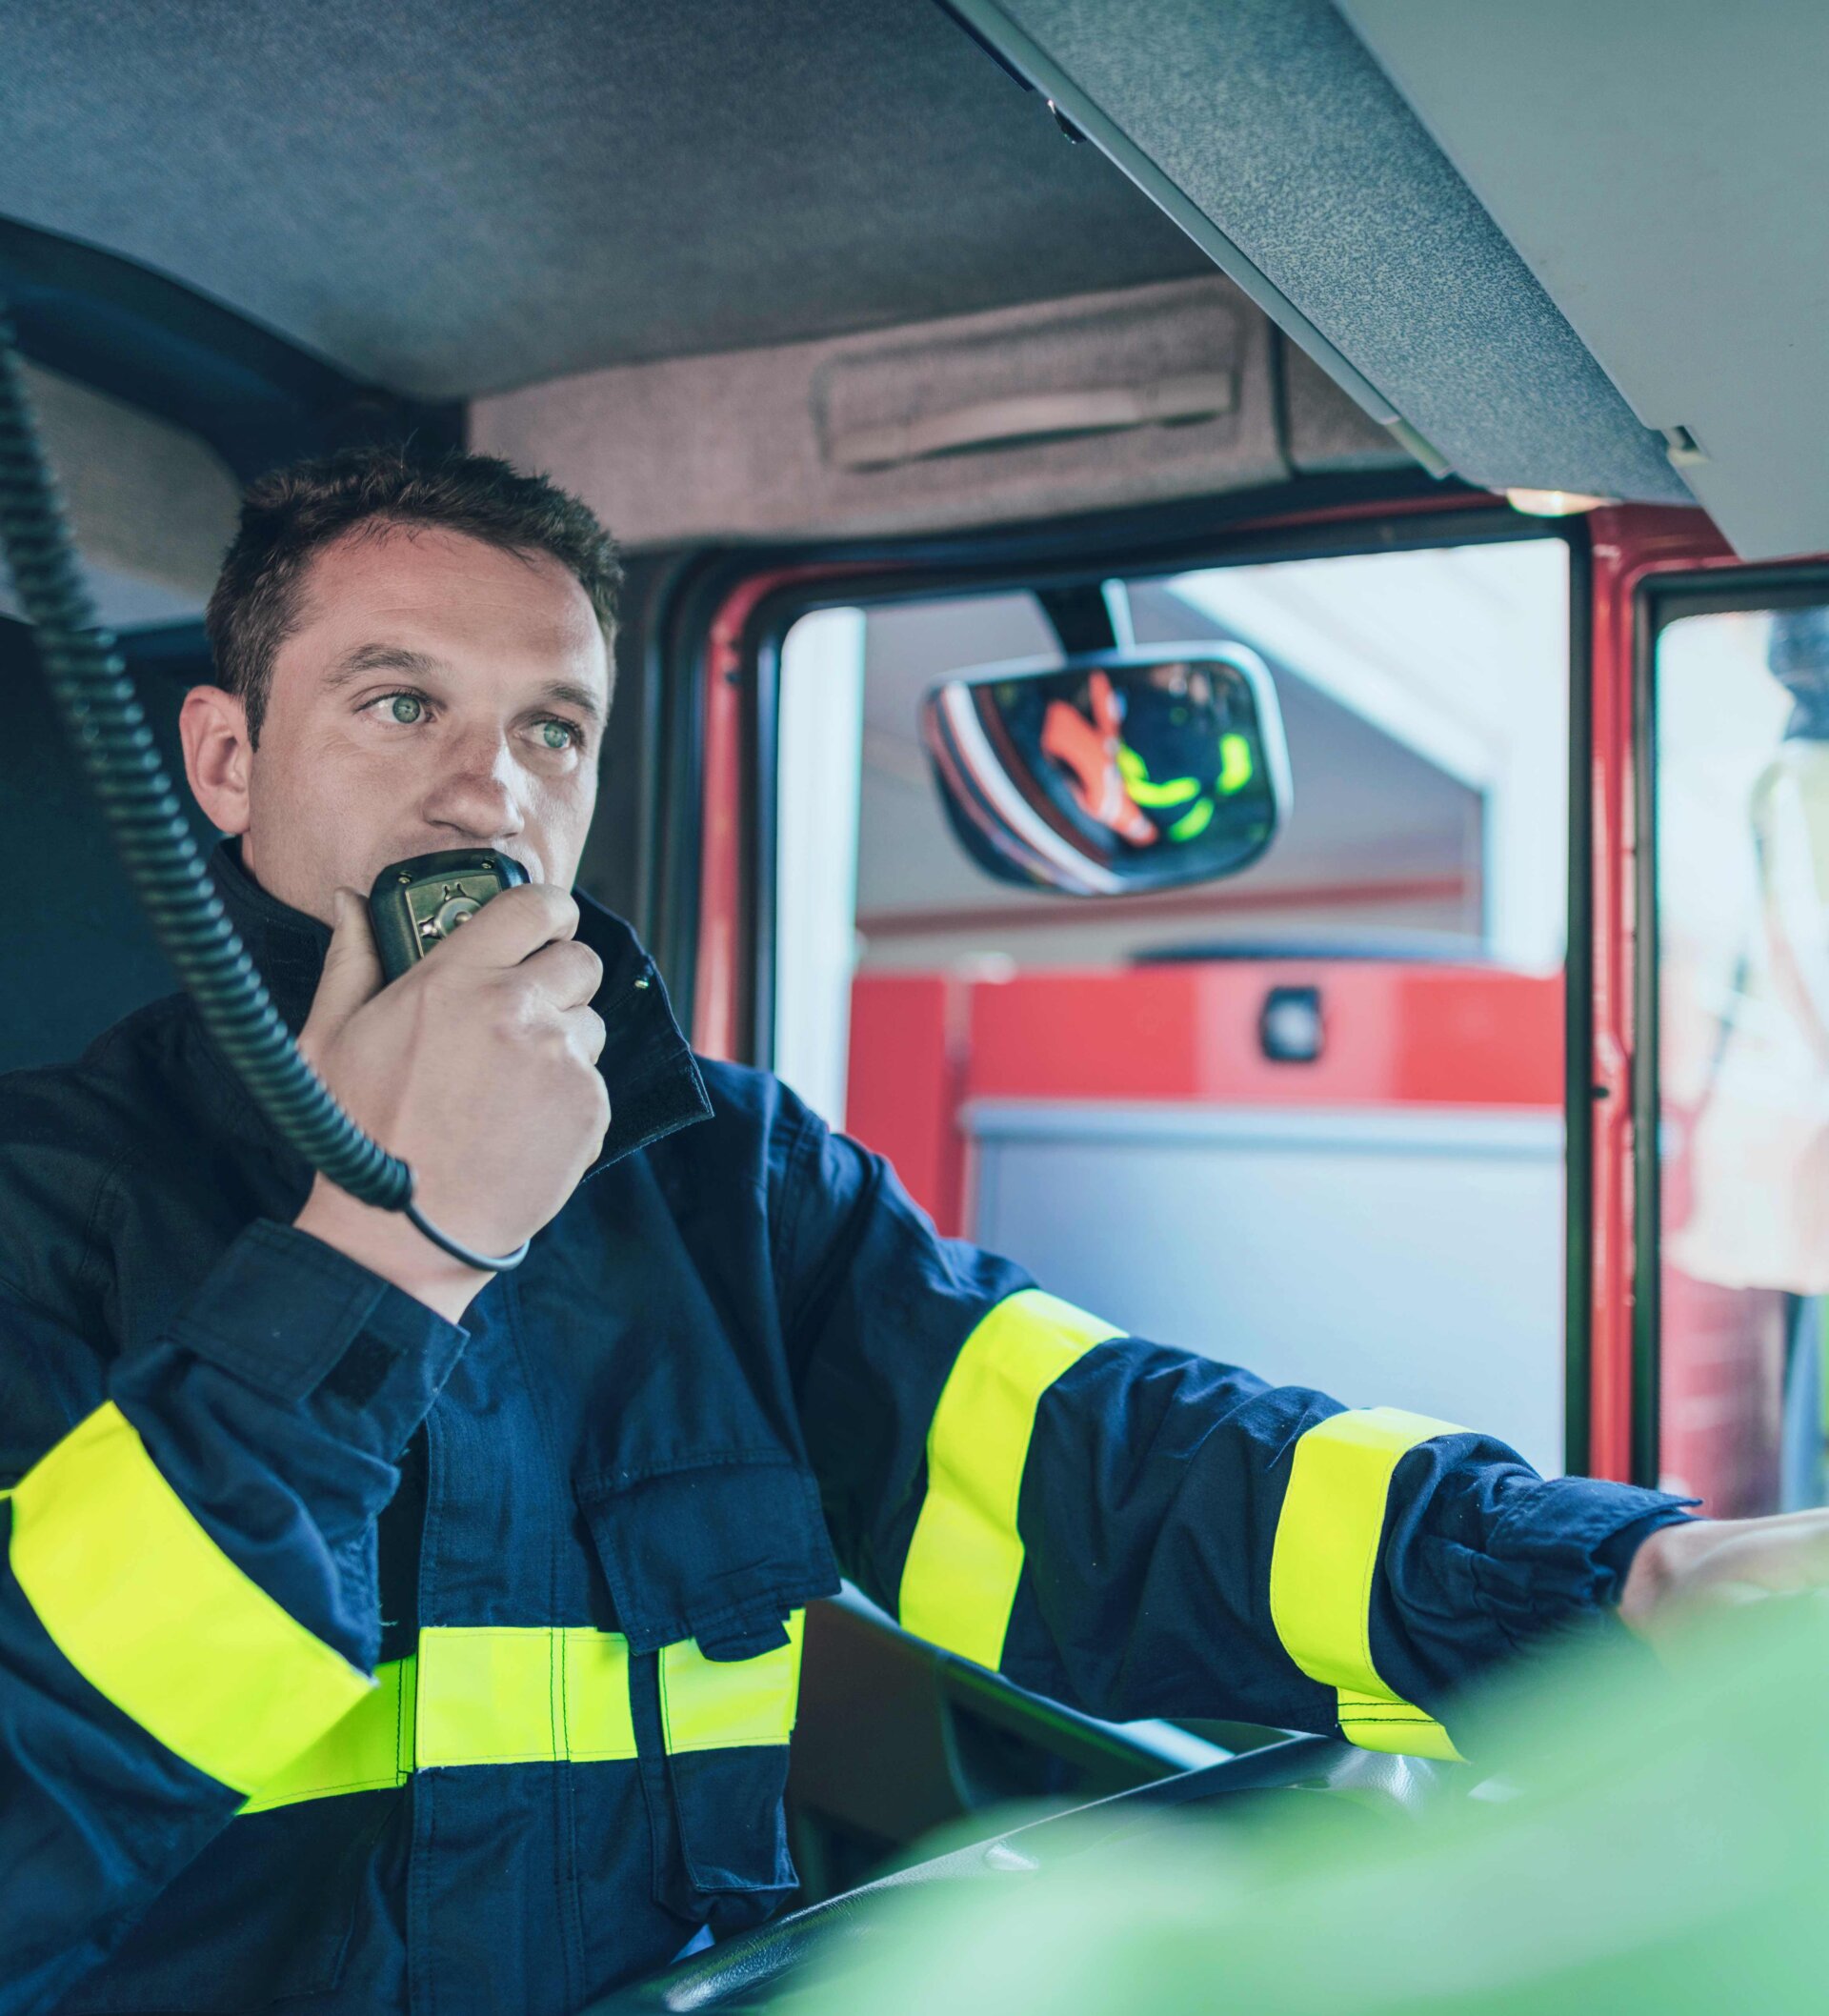 Firefighter with radio on duty